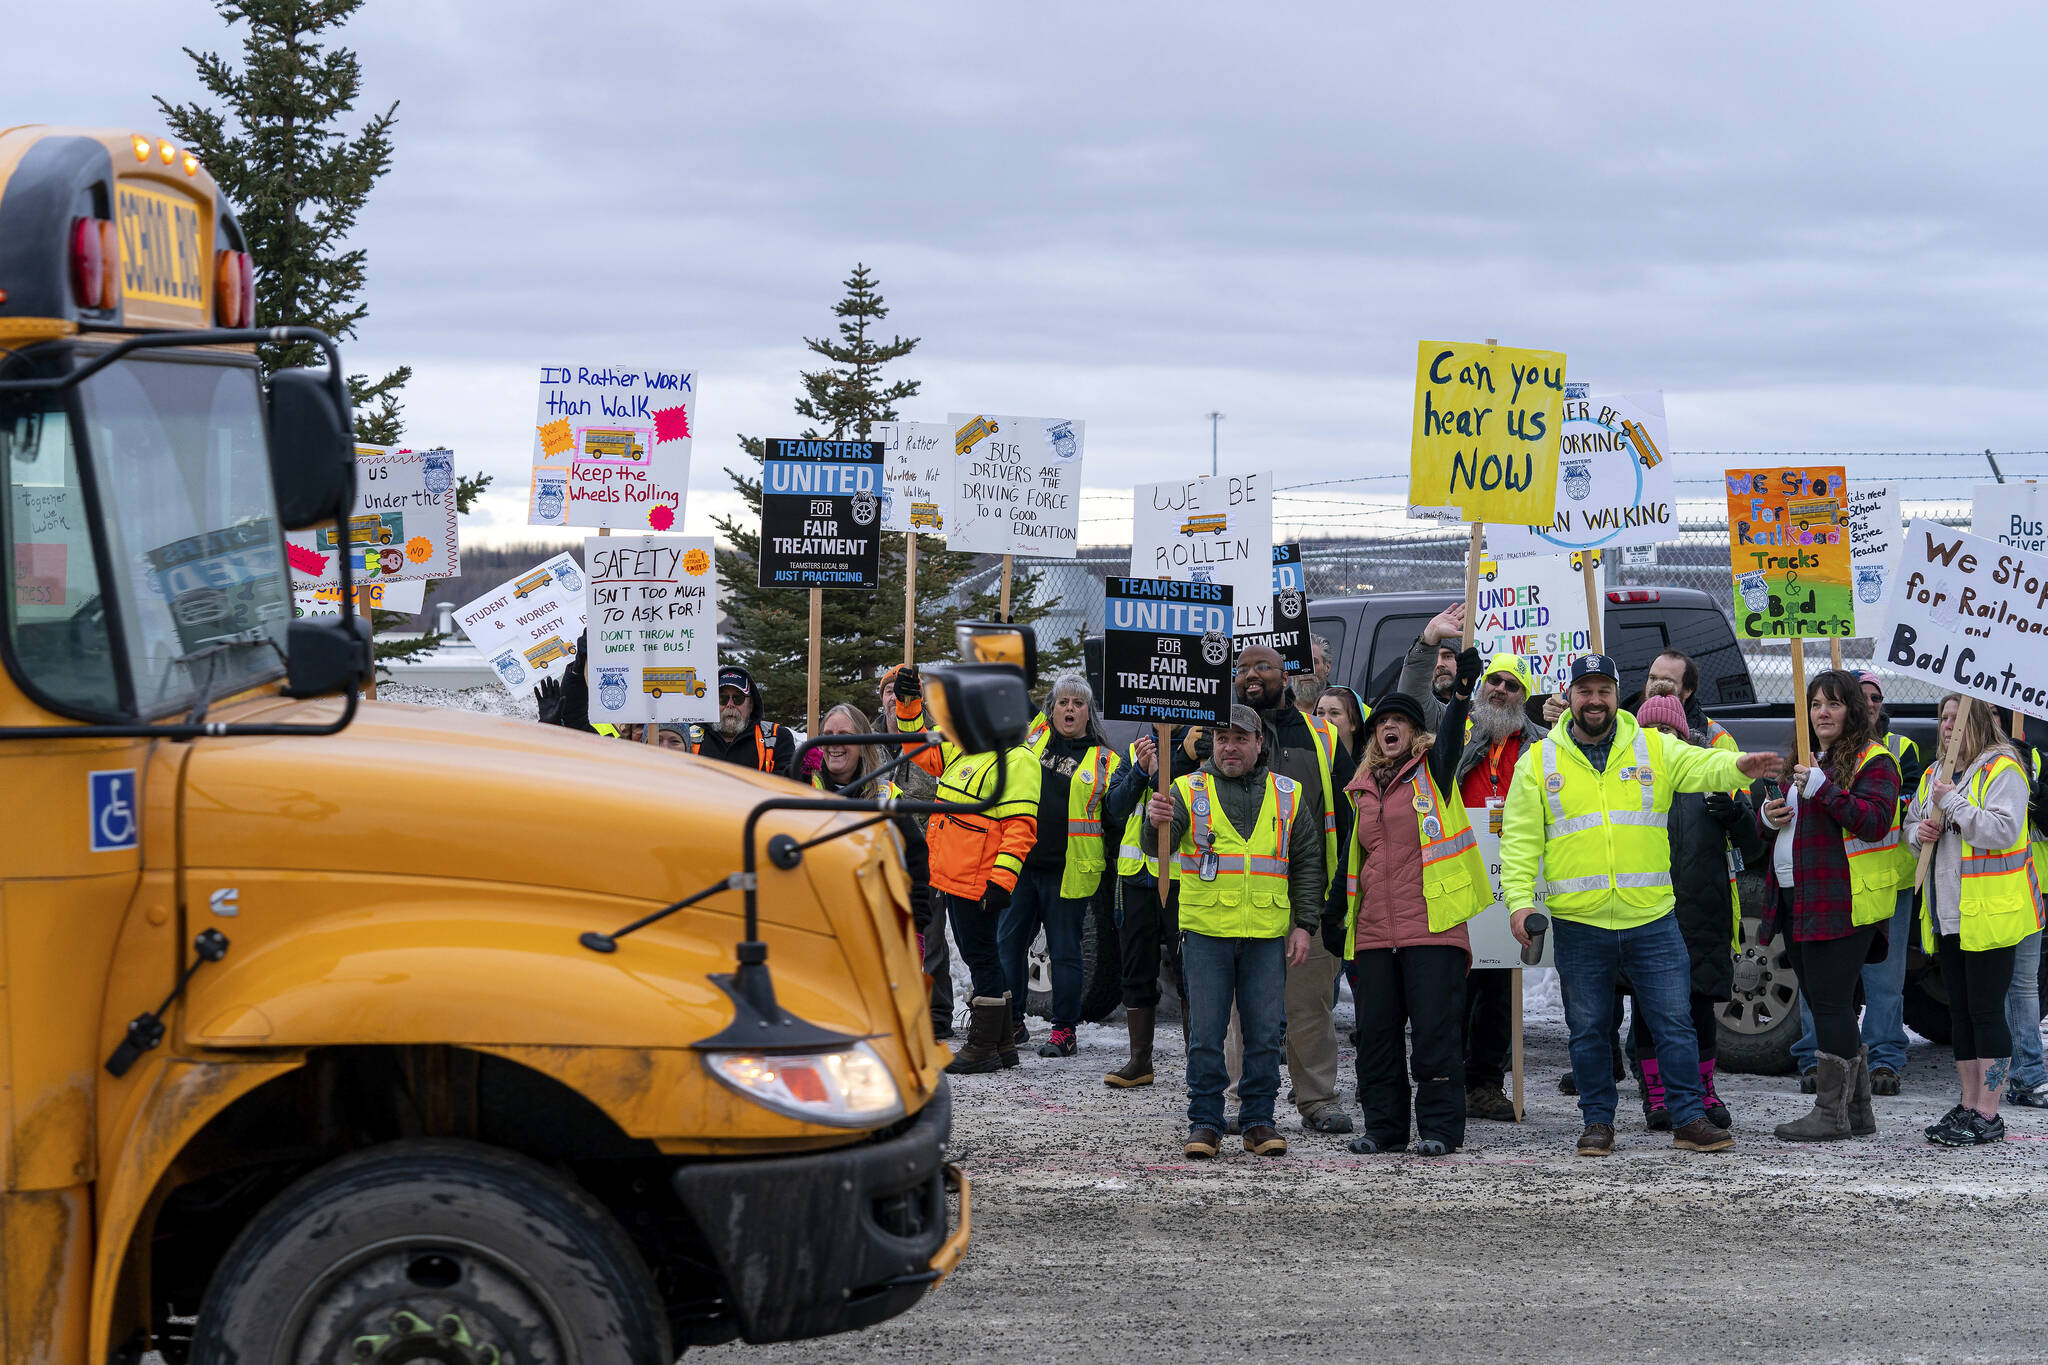 Loren Holmes / Anchorage Daily News 
Bus drivers picket outside the bus barn in Wasilla on Jan. 26.